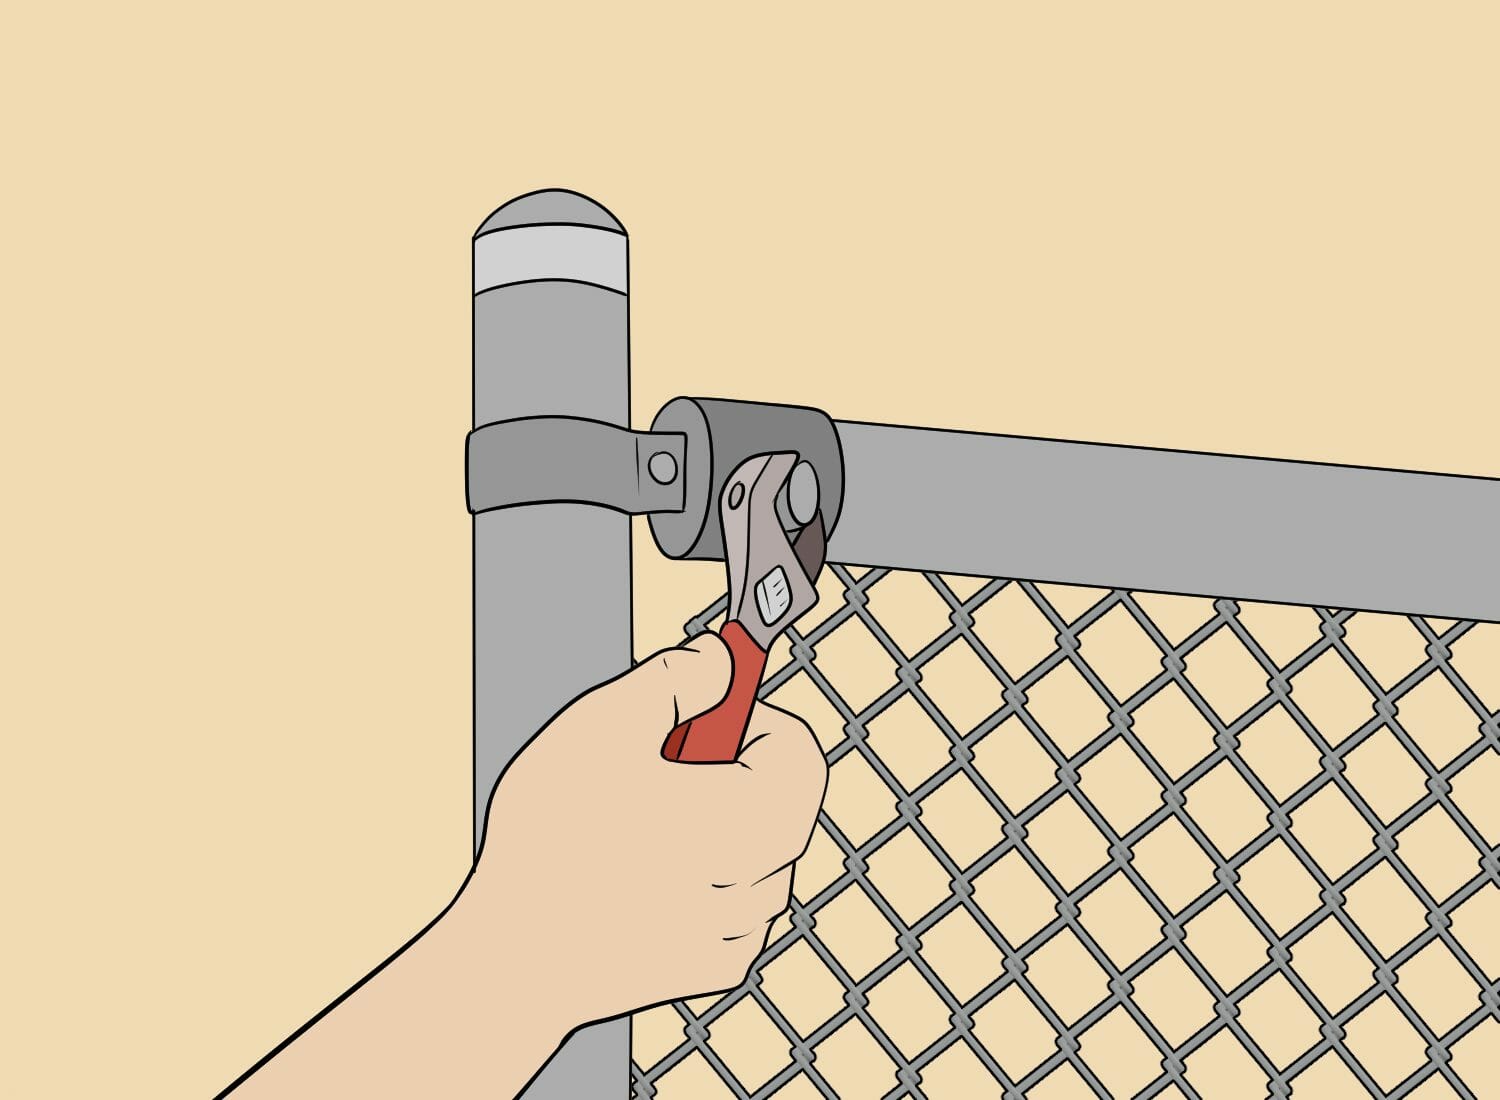 Remove clamps and tension bars